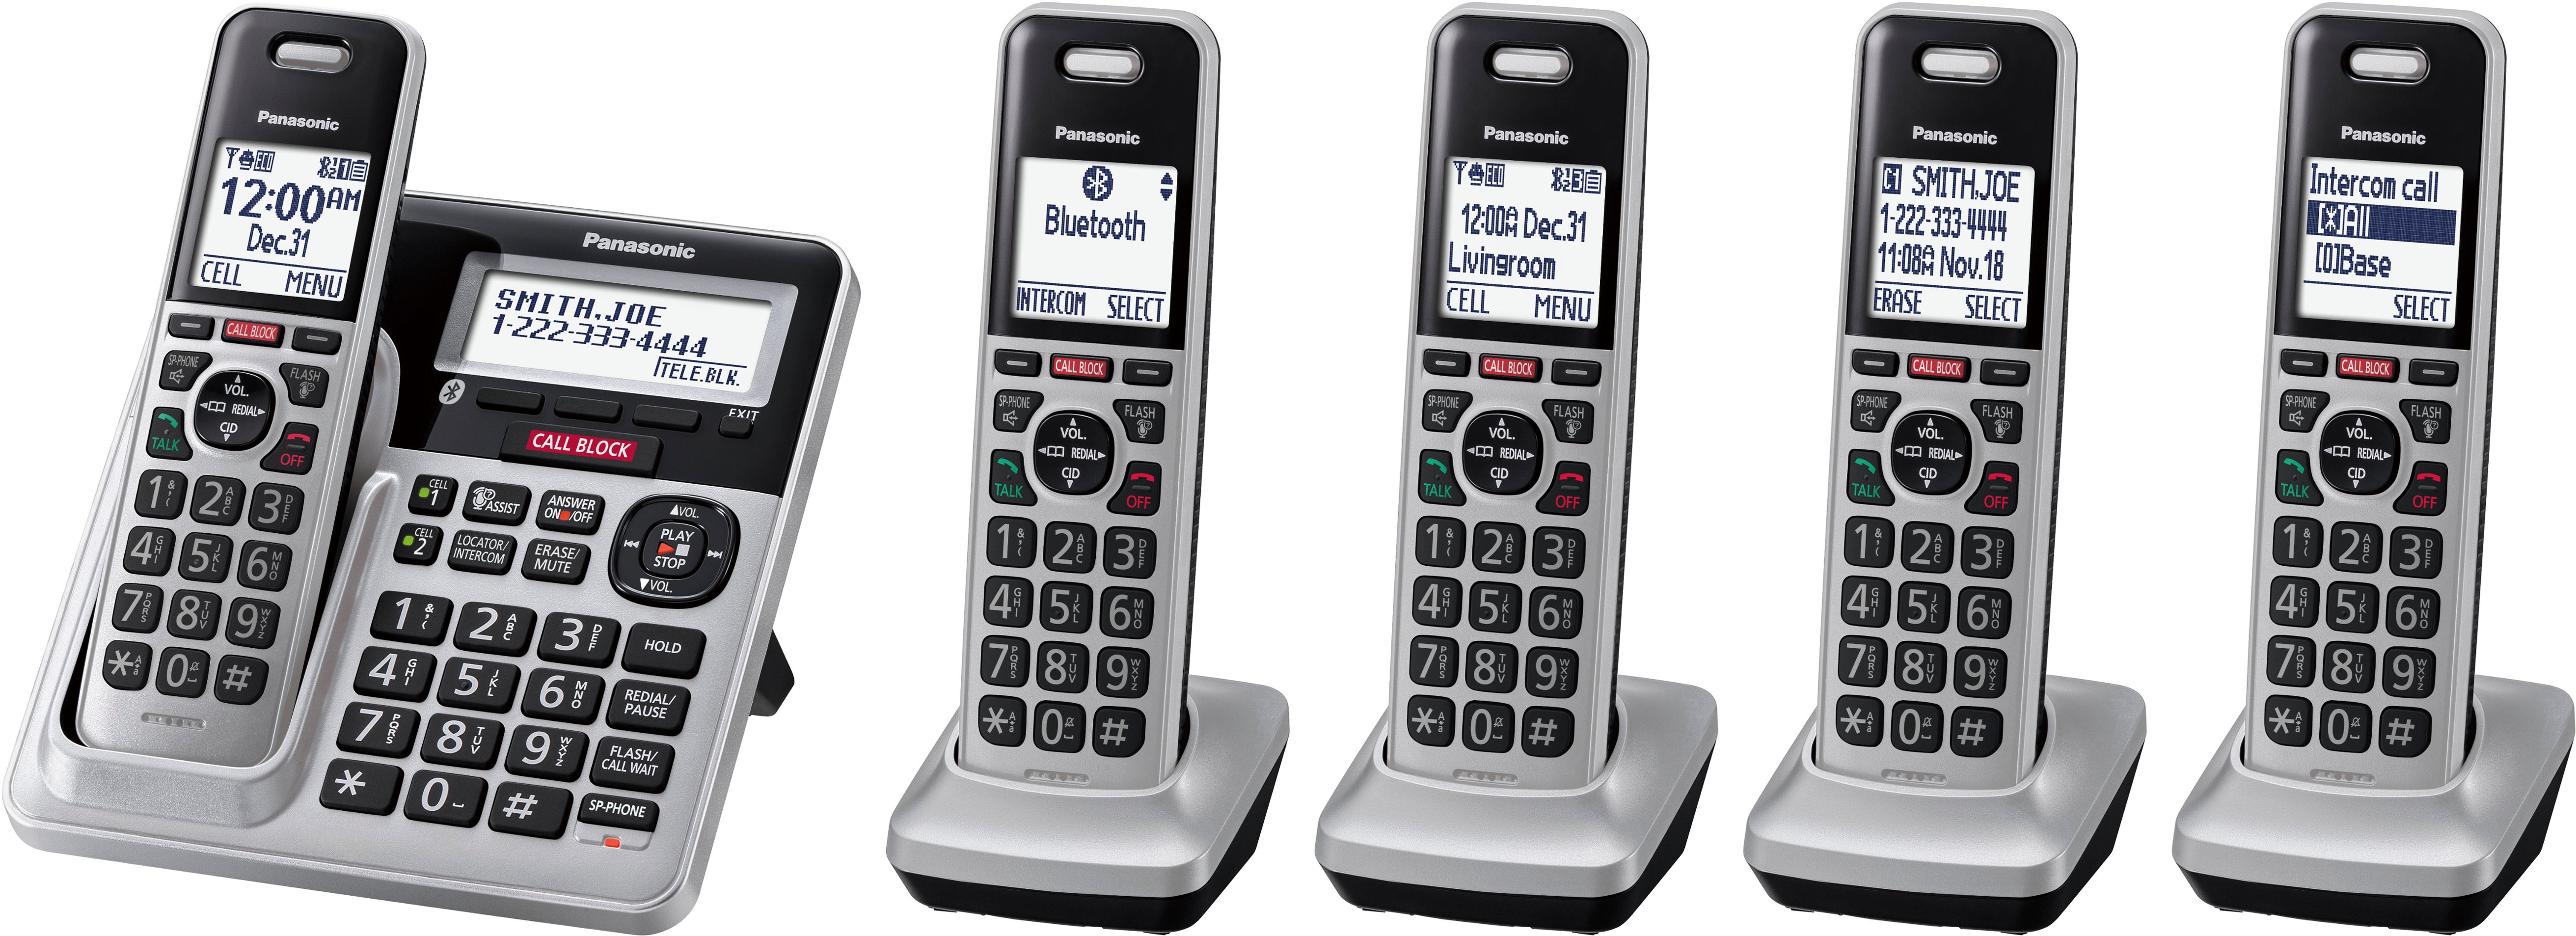 DECT 6.0 Technology Link2Cell Bluetooth Enabled Cordless Phone with Answering System Panasonic KX-TG885SK Talking Caller ID 5 Handset Renewed 